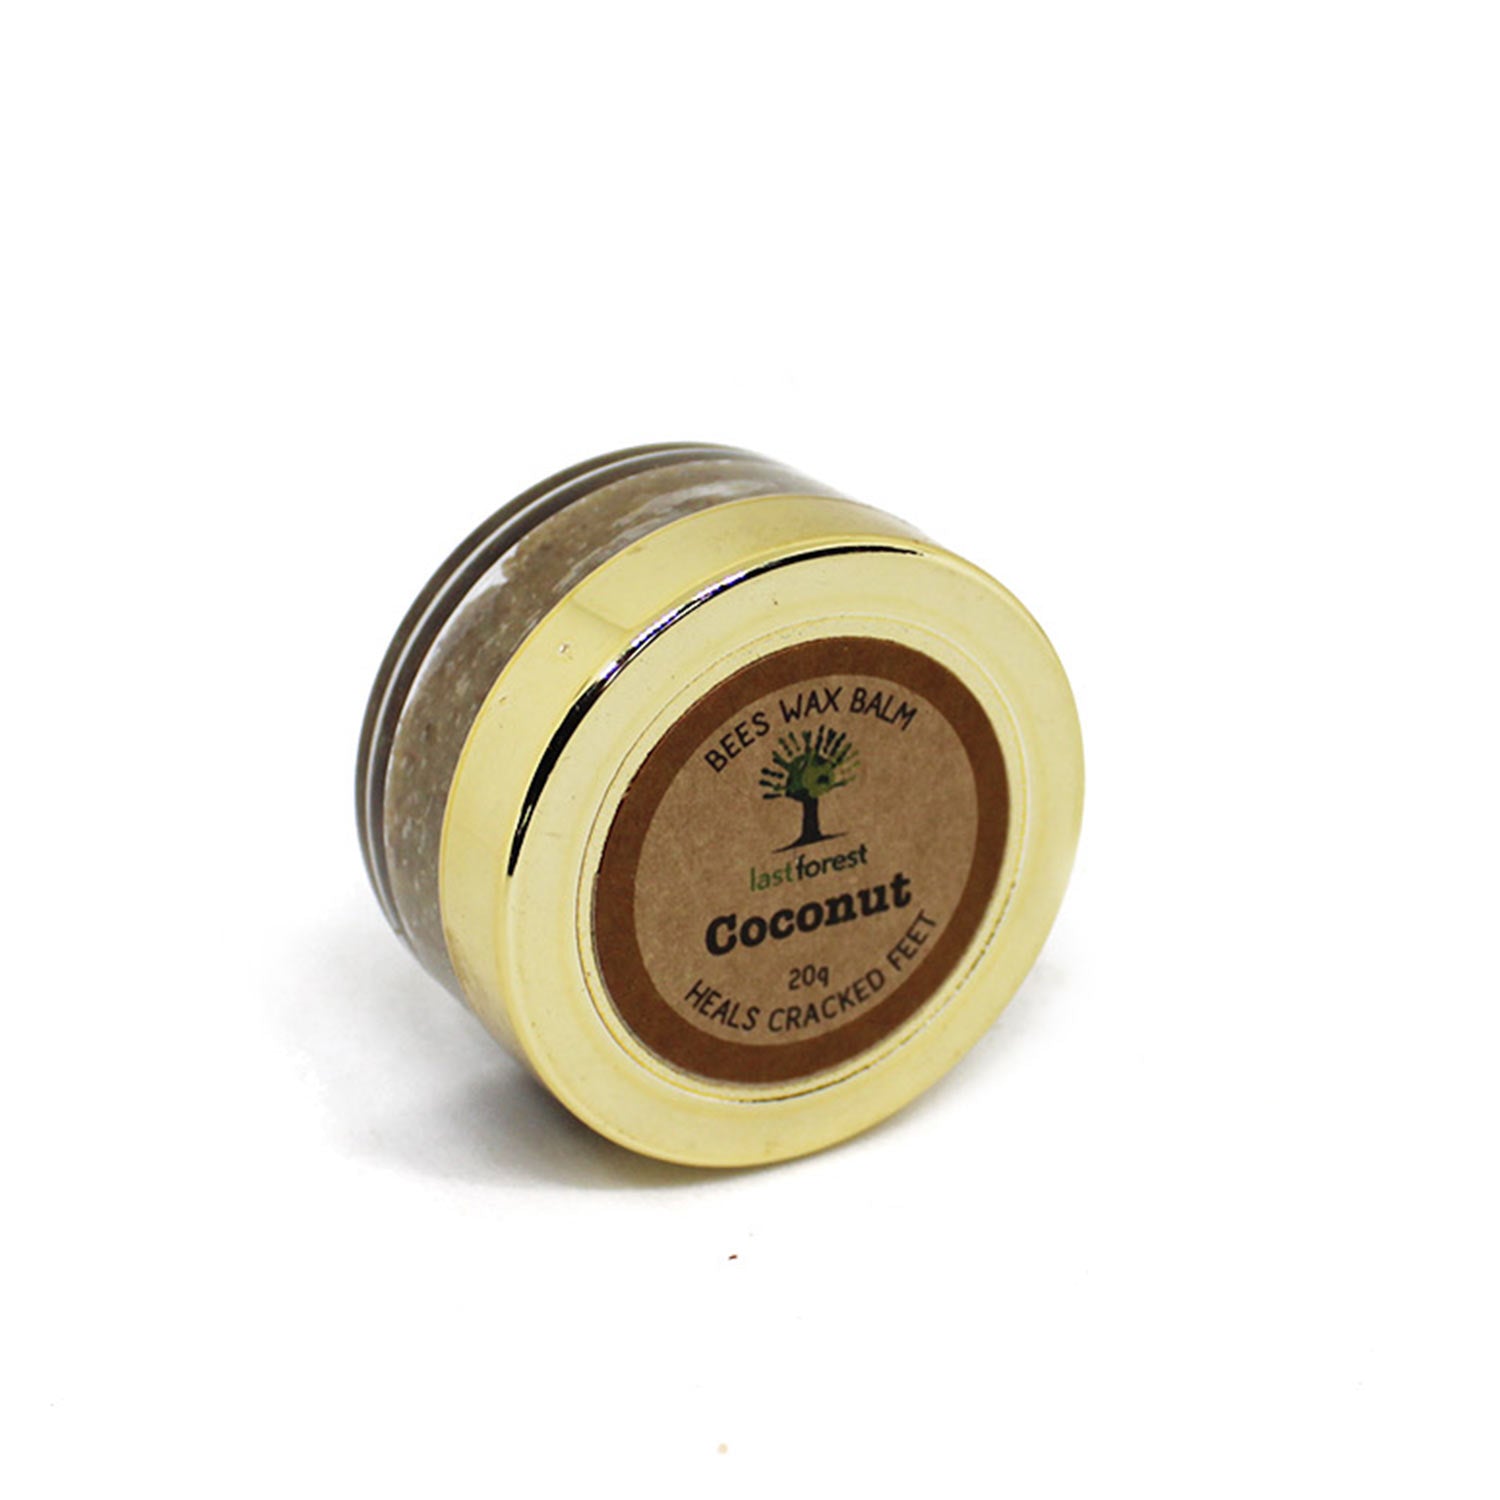 Last Forest Coconut Balm for Cracked Heels 20g